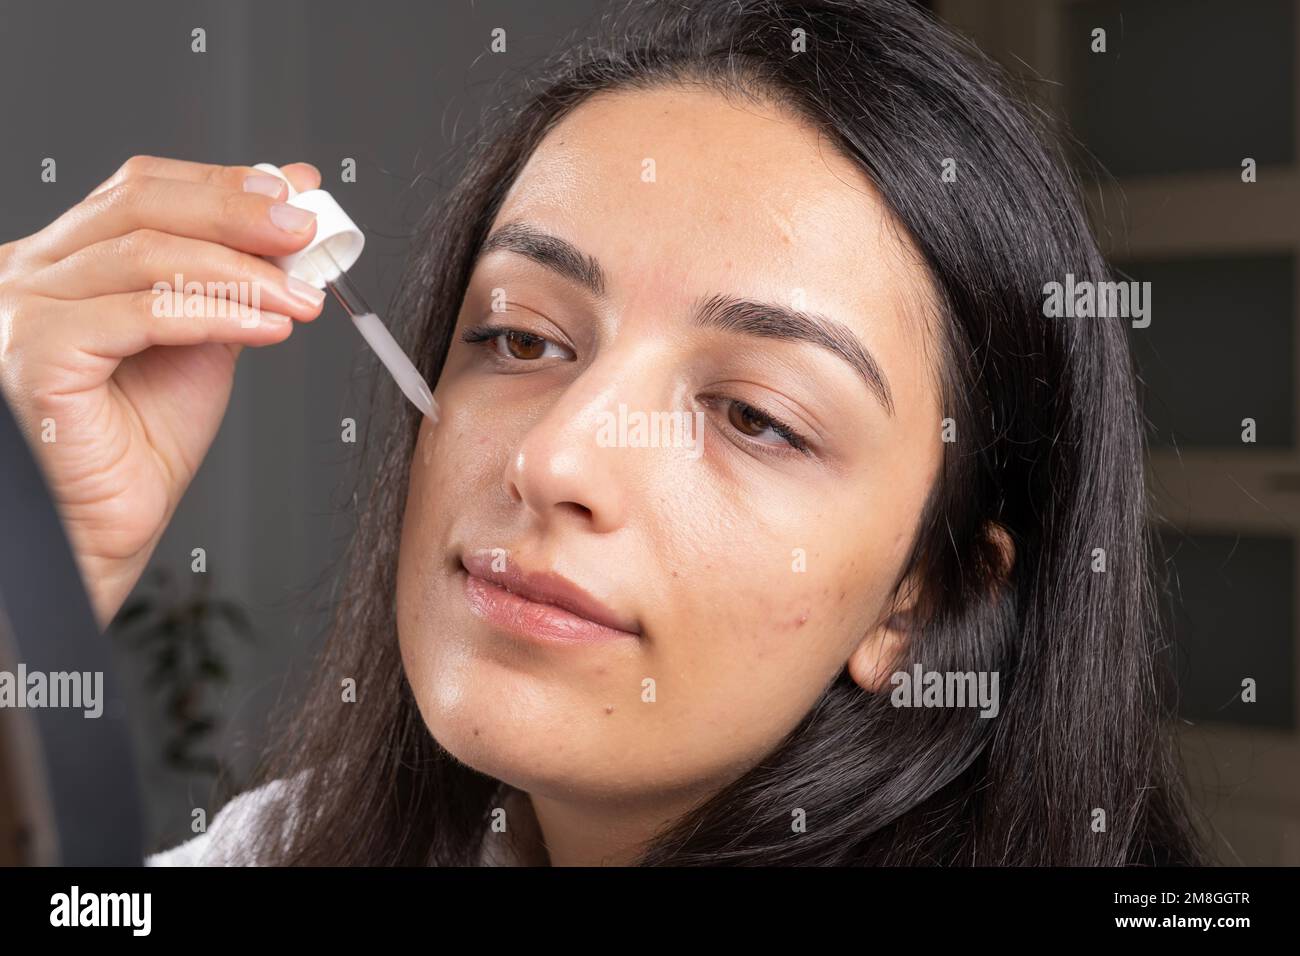 Woman holding dripper and applying face skin care serum. Acne treatment concept idea image, copy space. Anti age wrinkle, natural beauty close up view Stock Photo